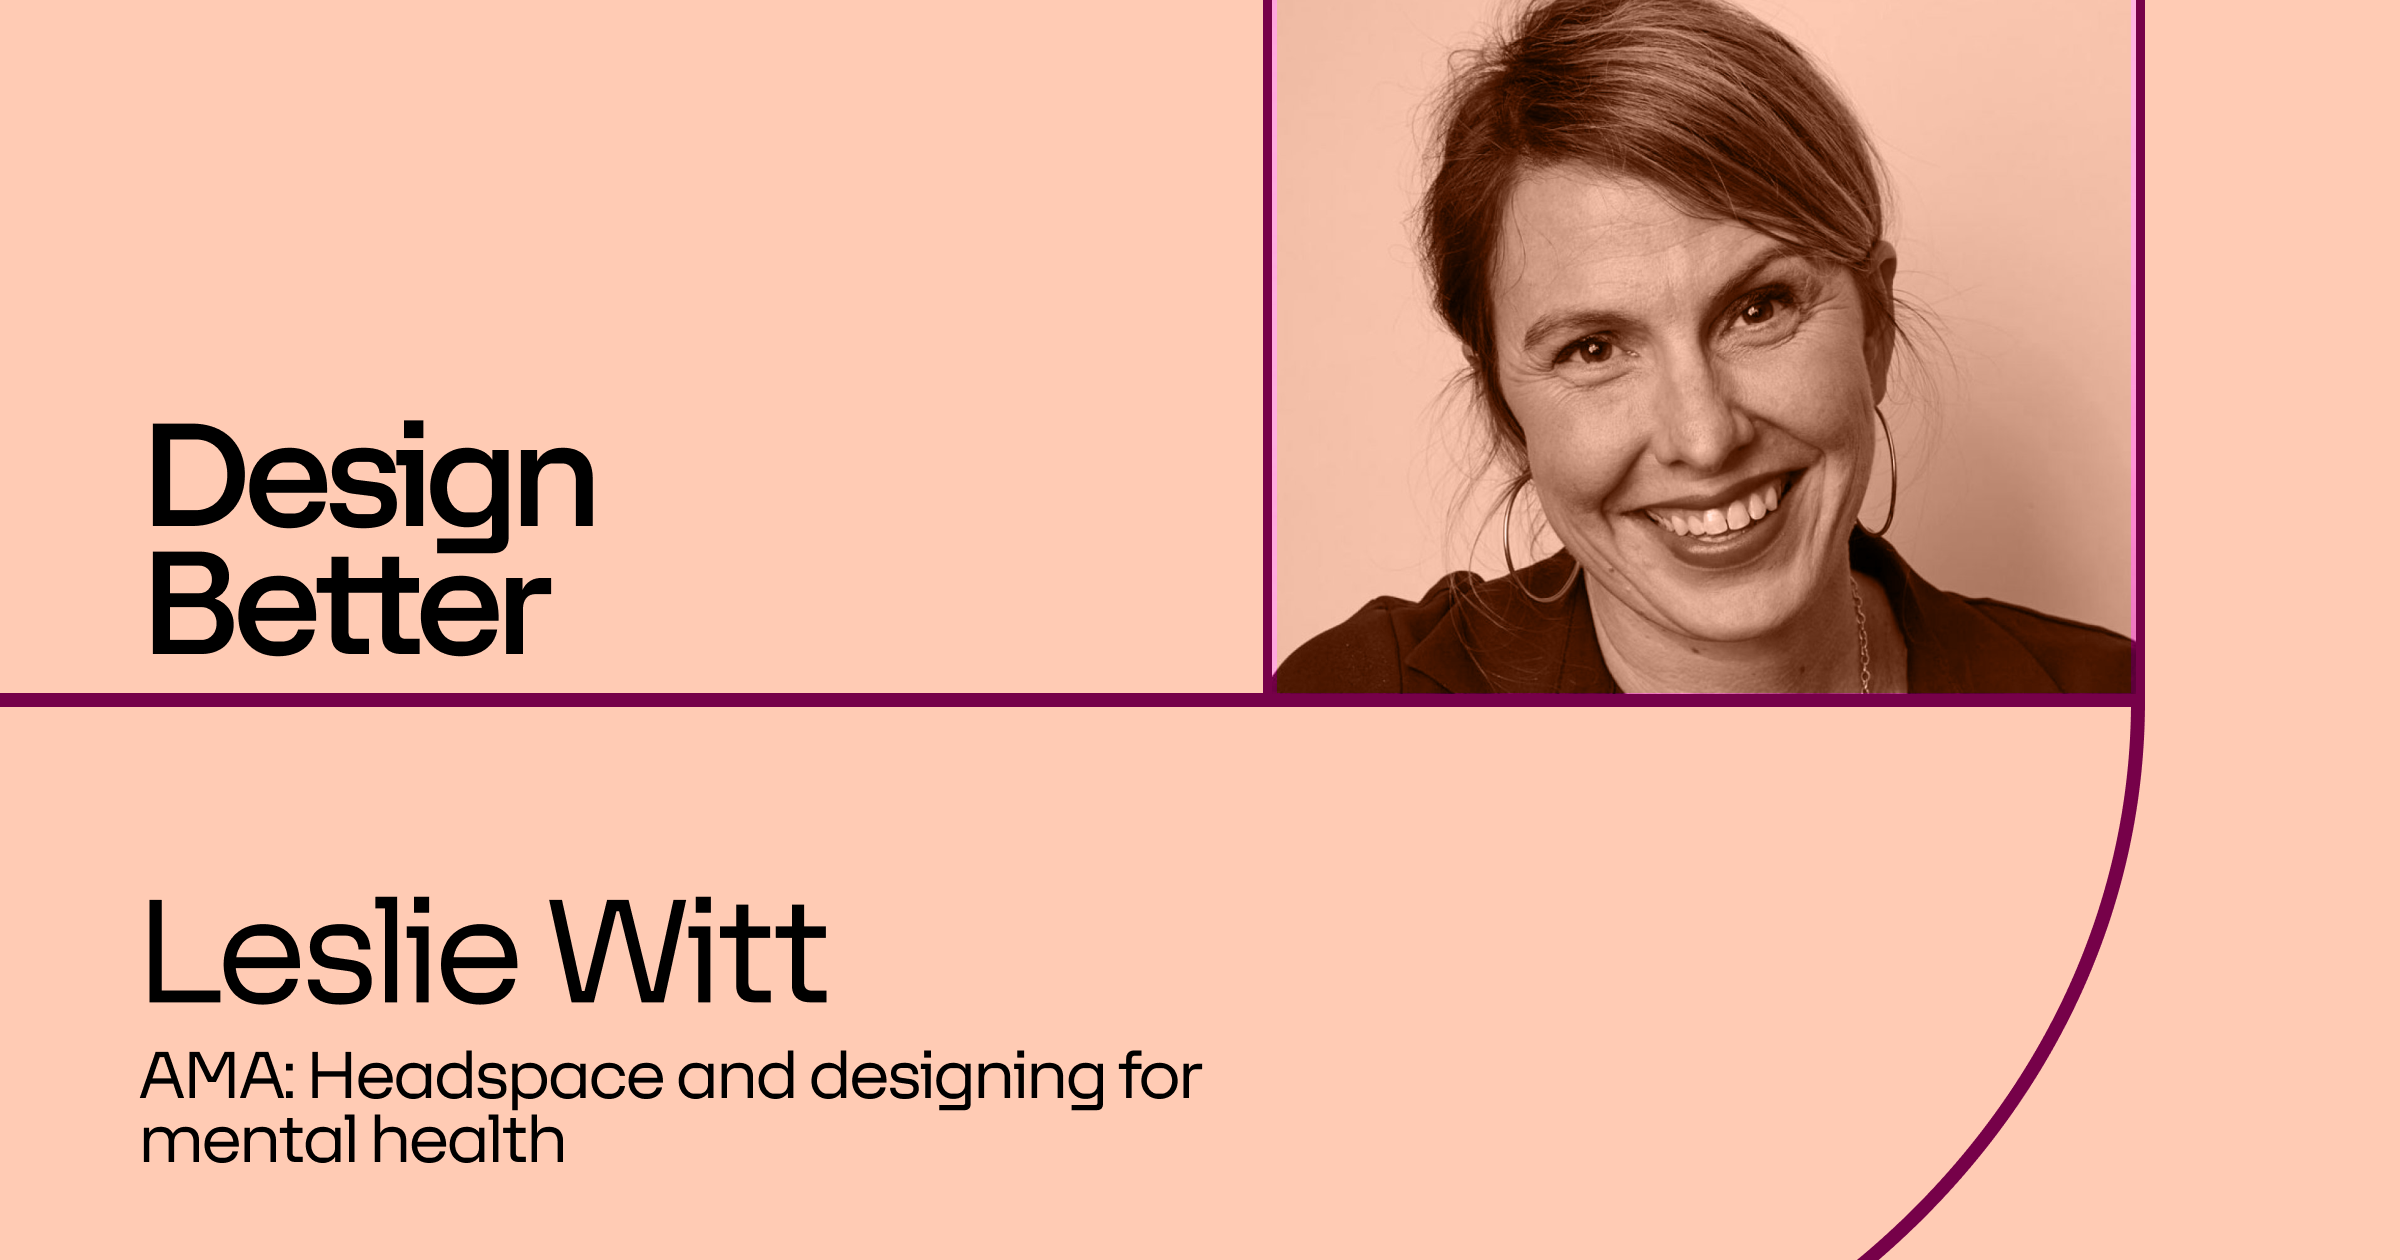 AMA: Leslie Witt, Headspace and designing for mental health event cover photo